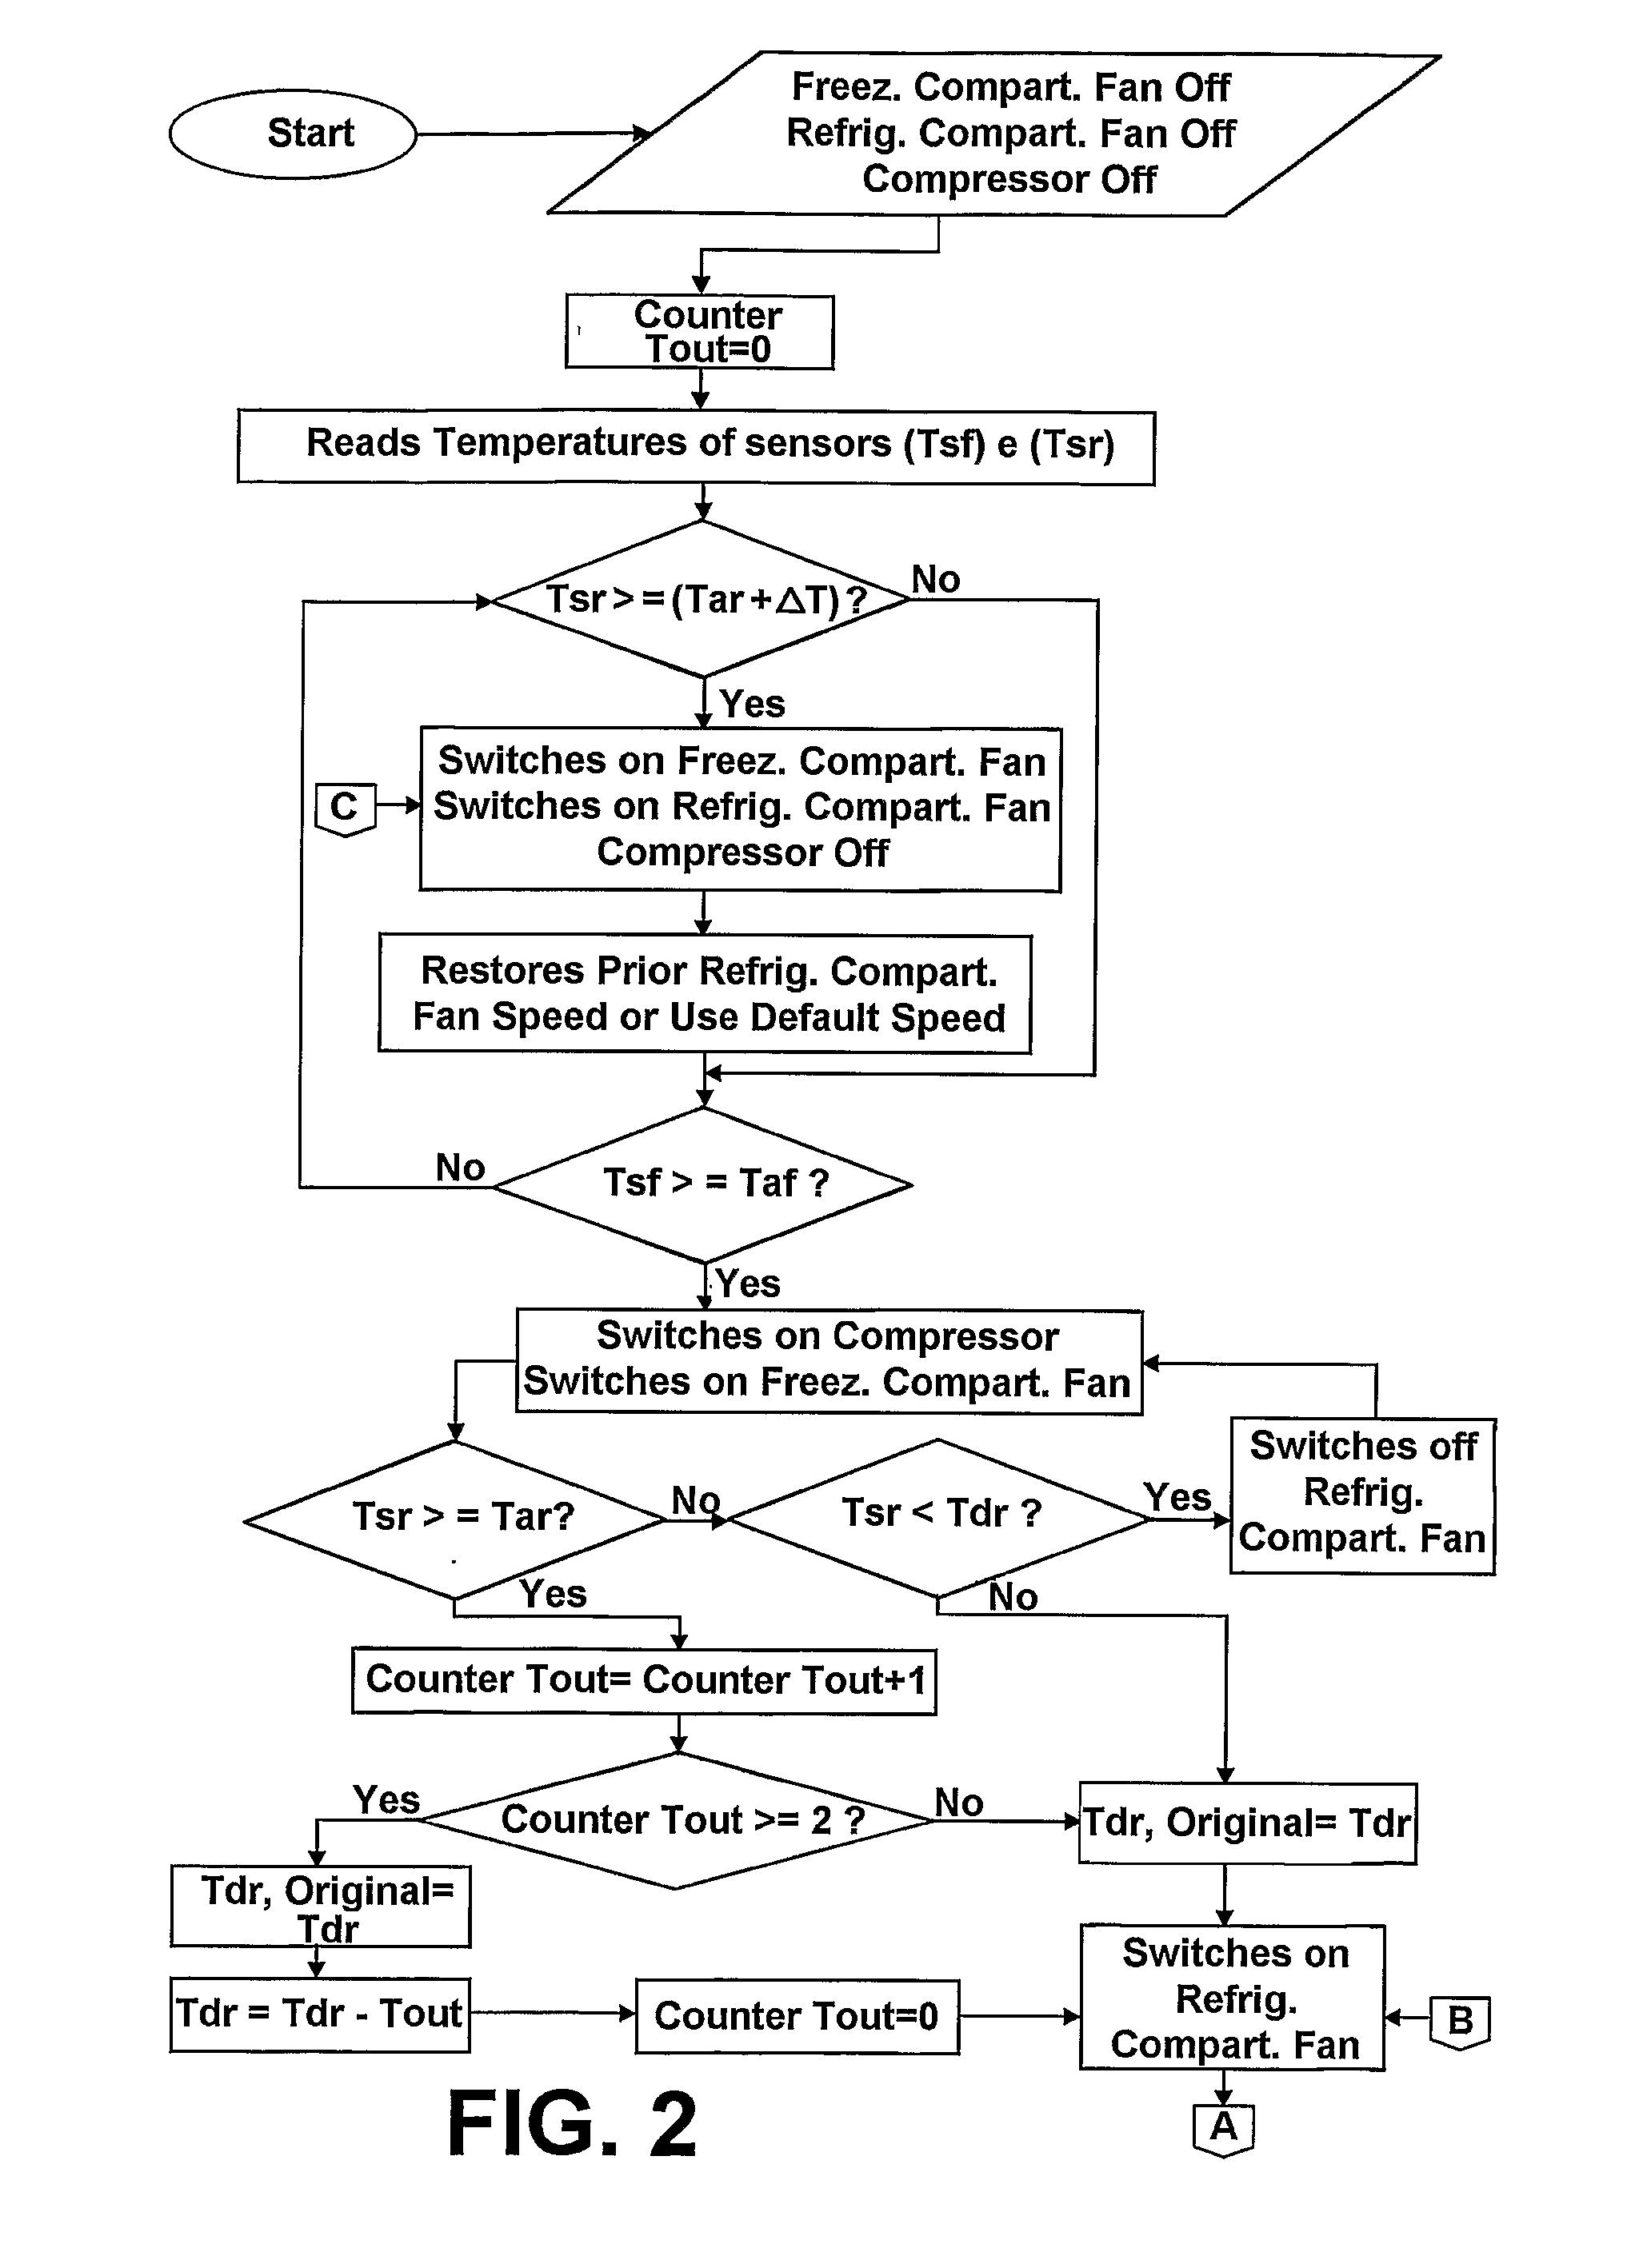 Refrigeration Control System in Combined Refrigeration Appliances